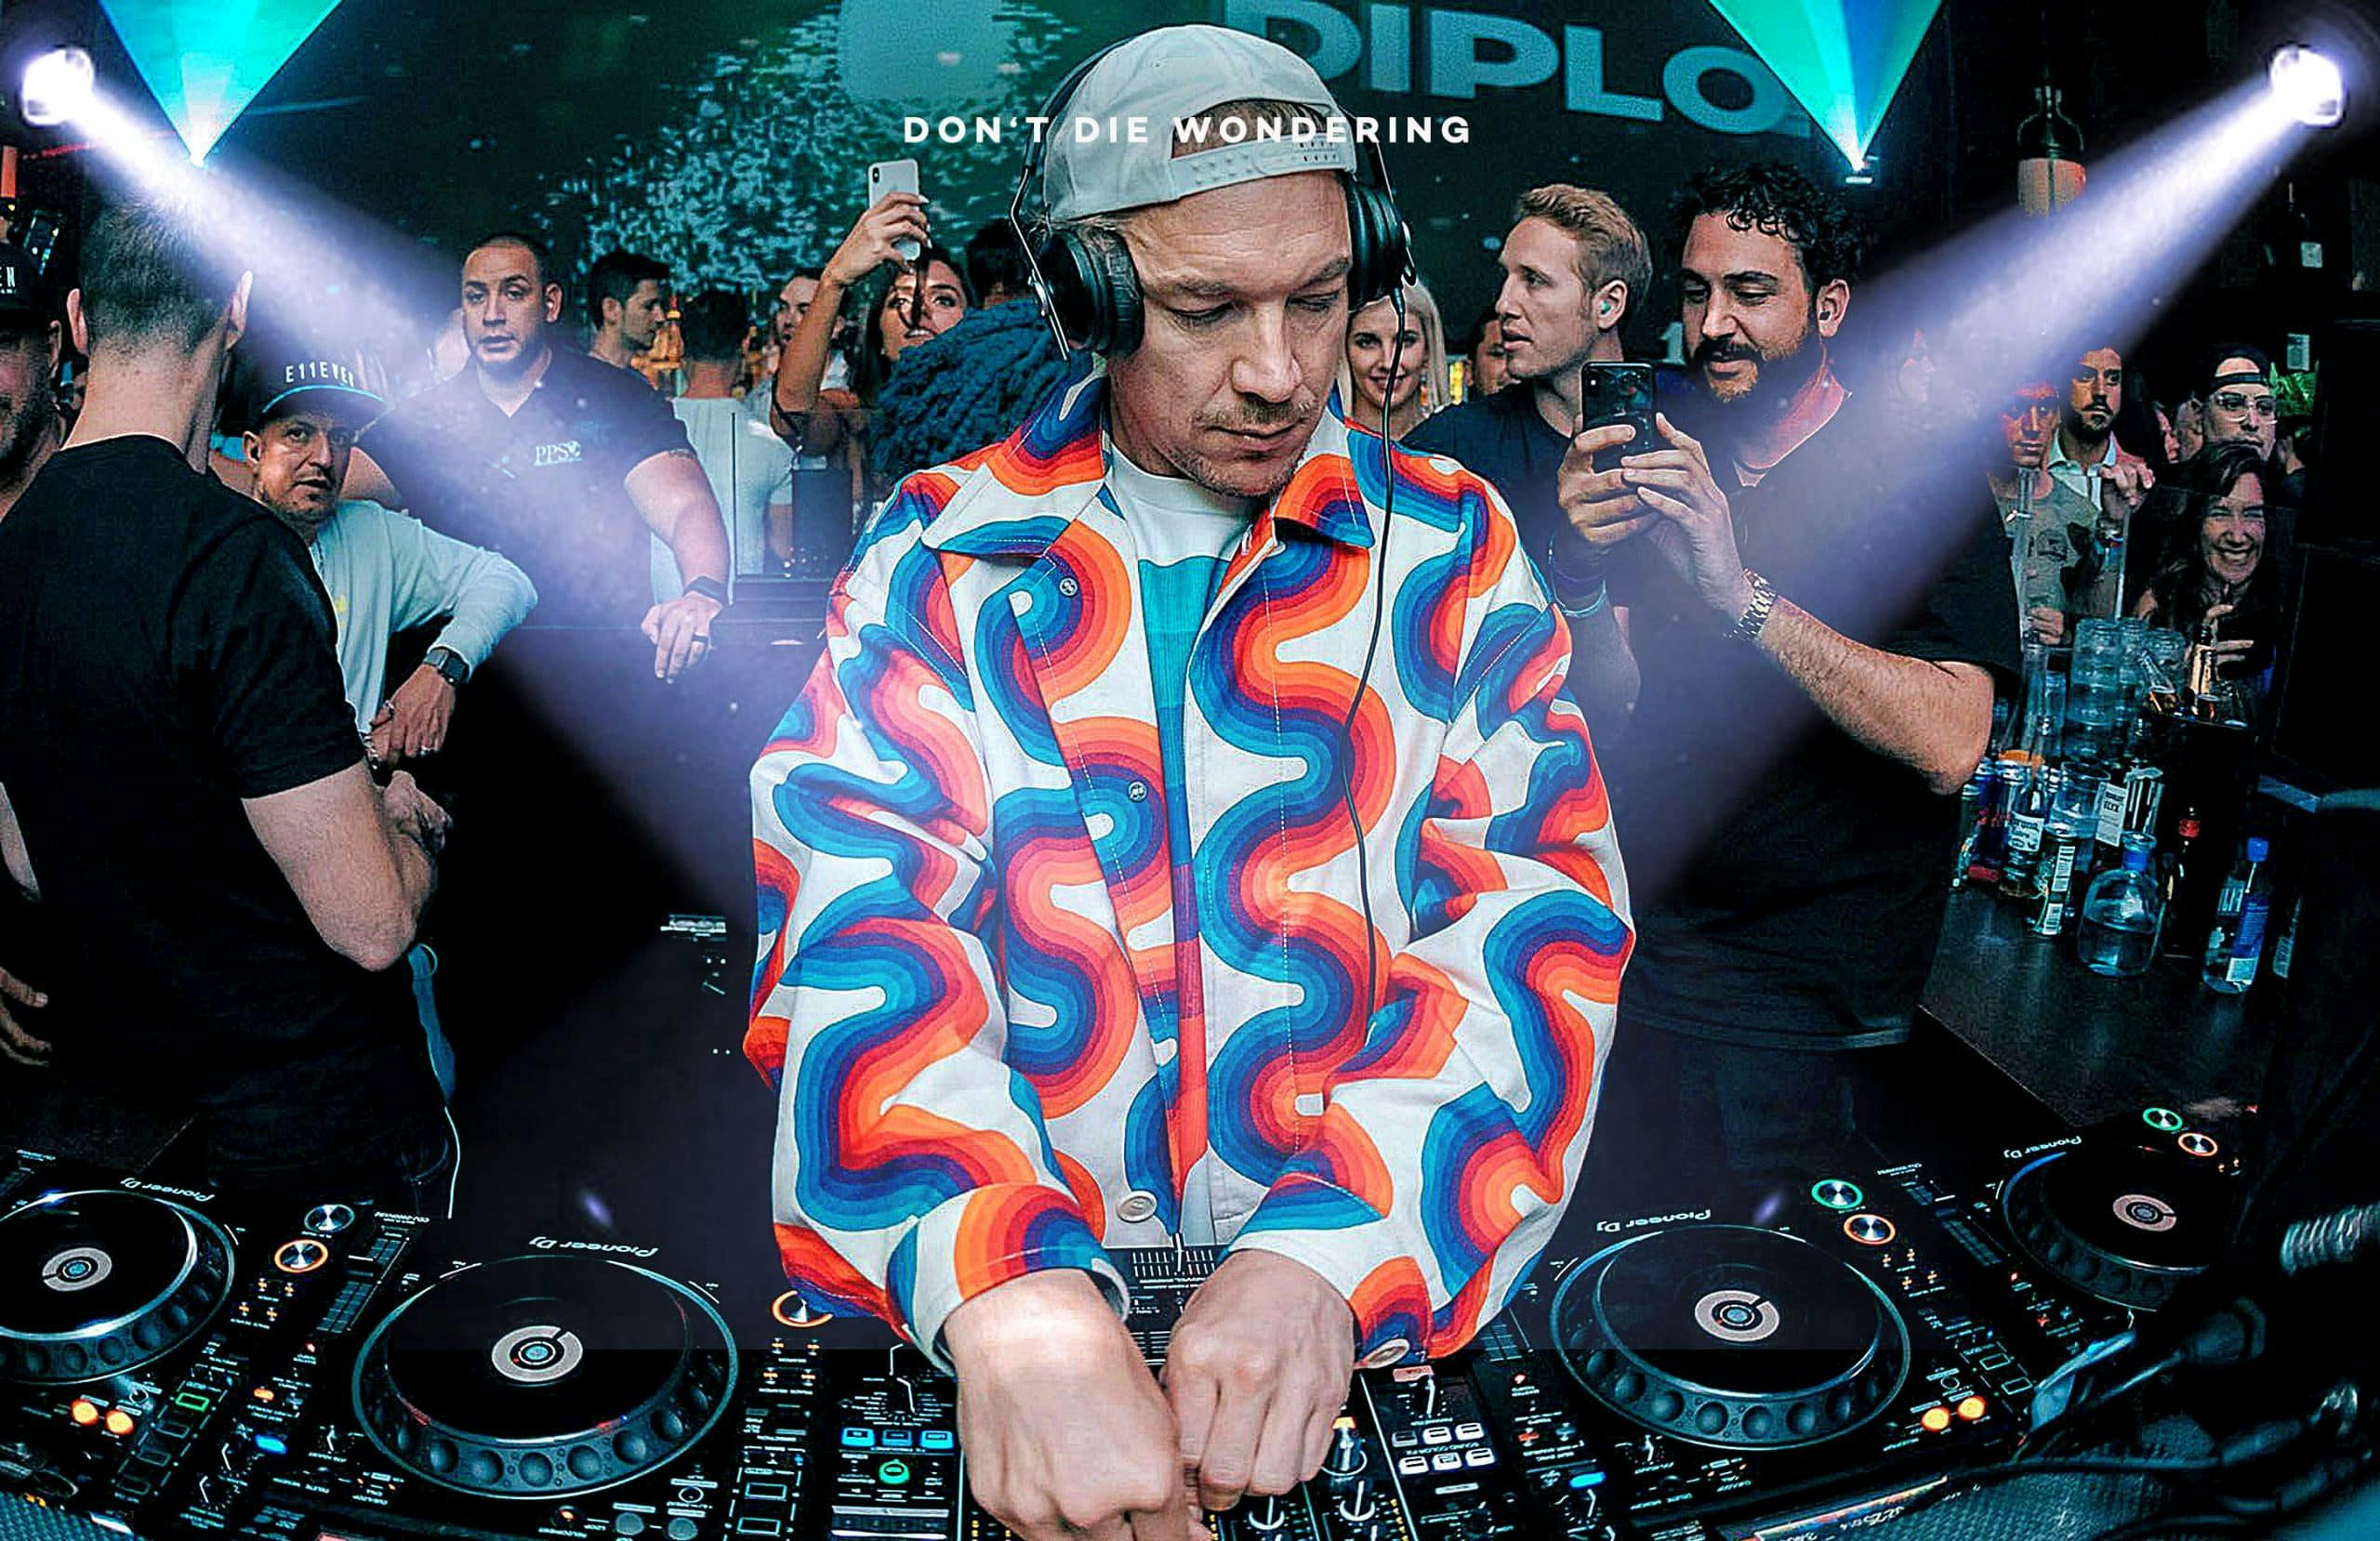 Diplo | “It’s Never Too Late To Change Your Luck”